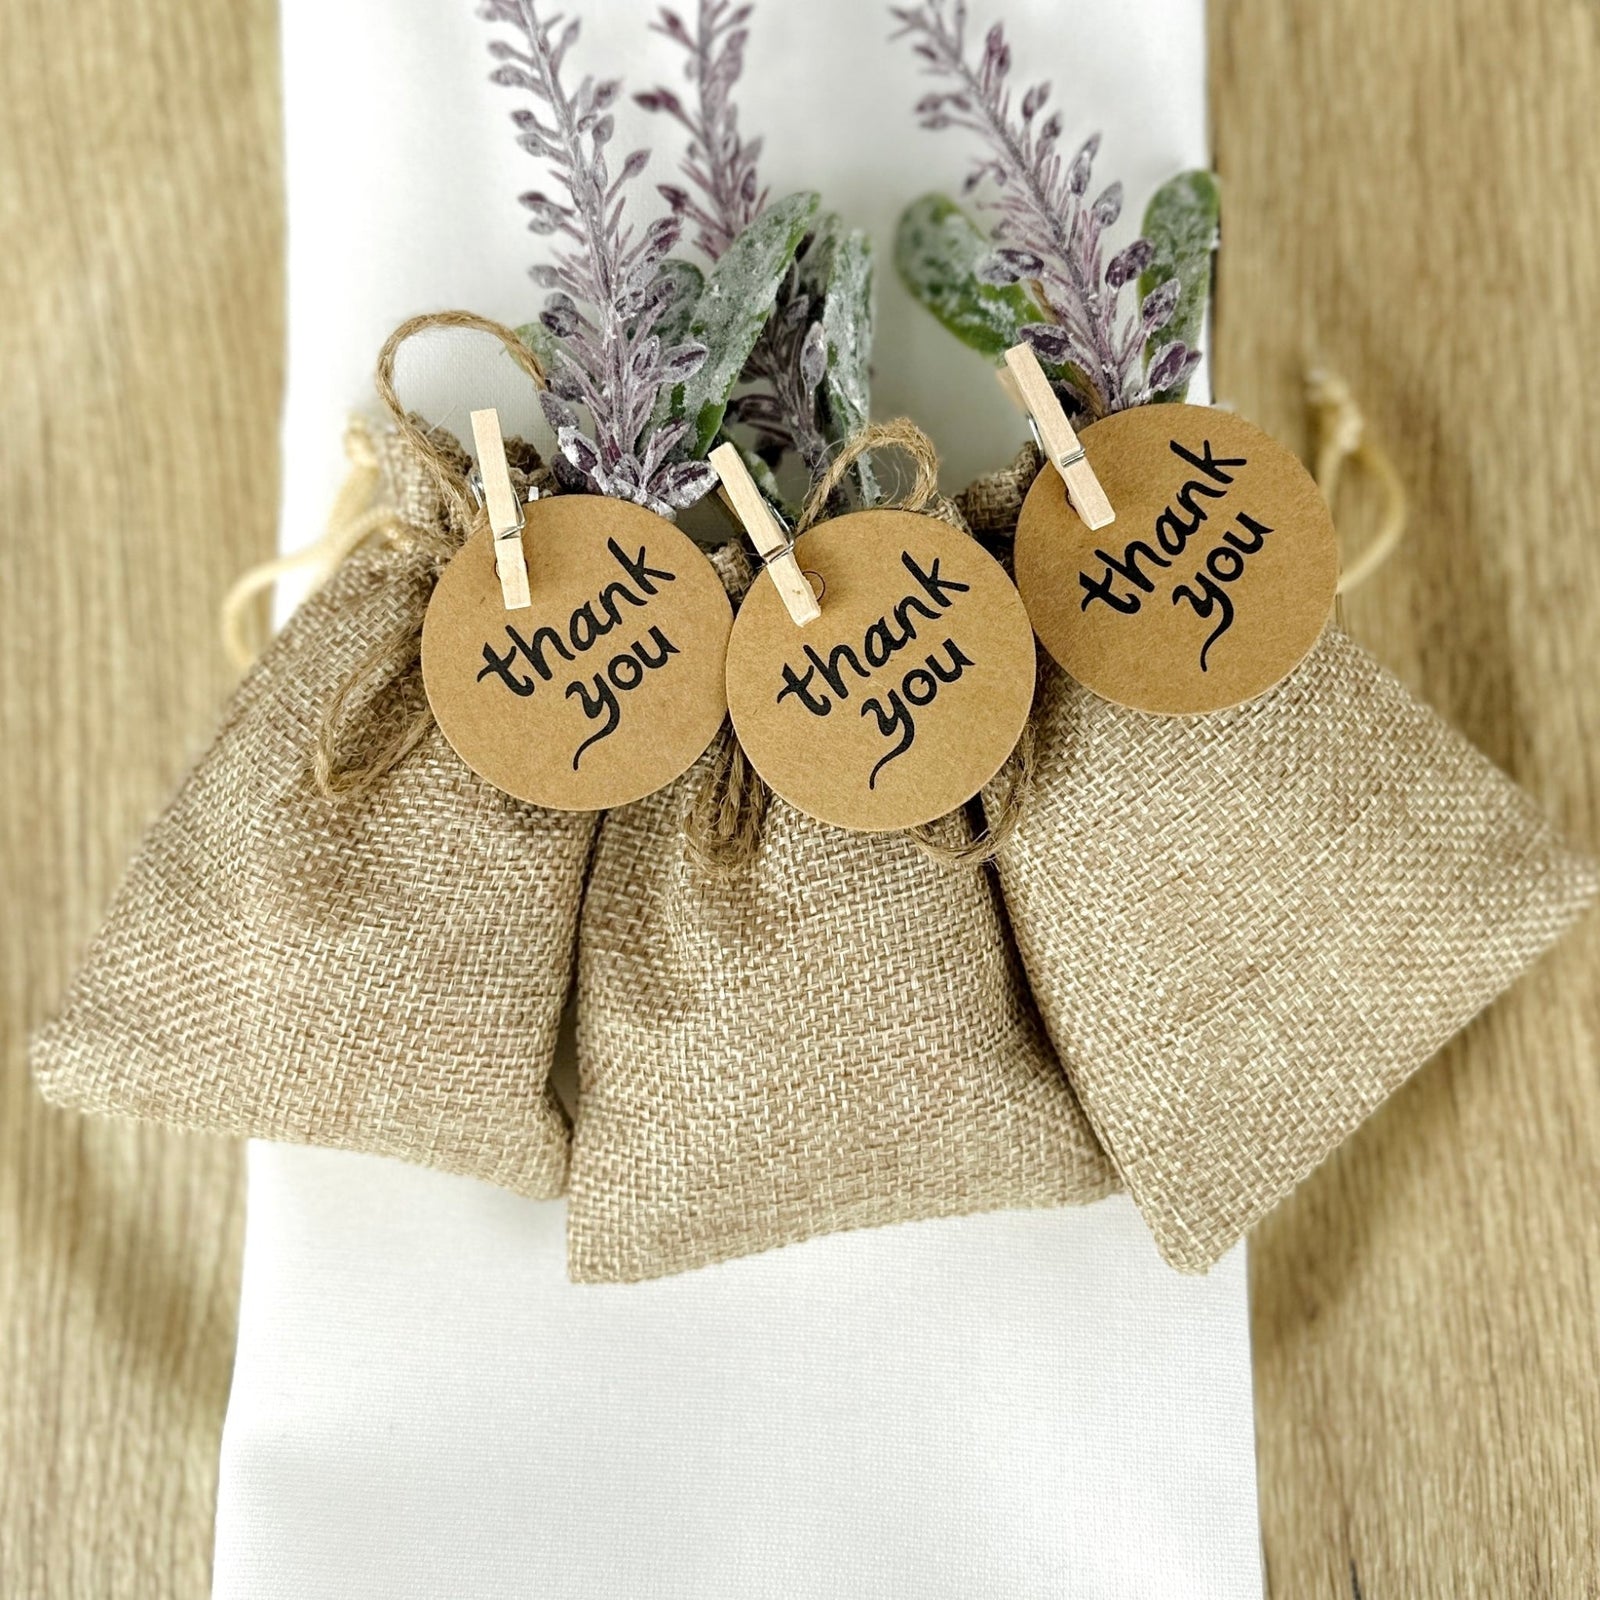 Cheap Wedding Favours: 30 Gifts for £1 or Less 